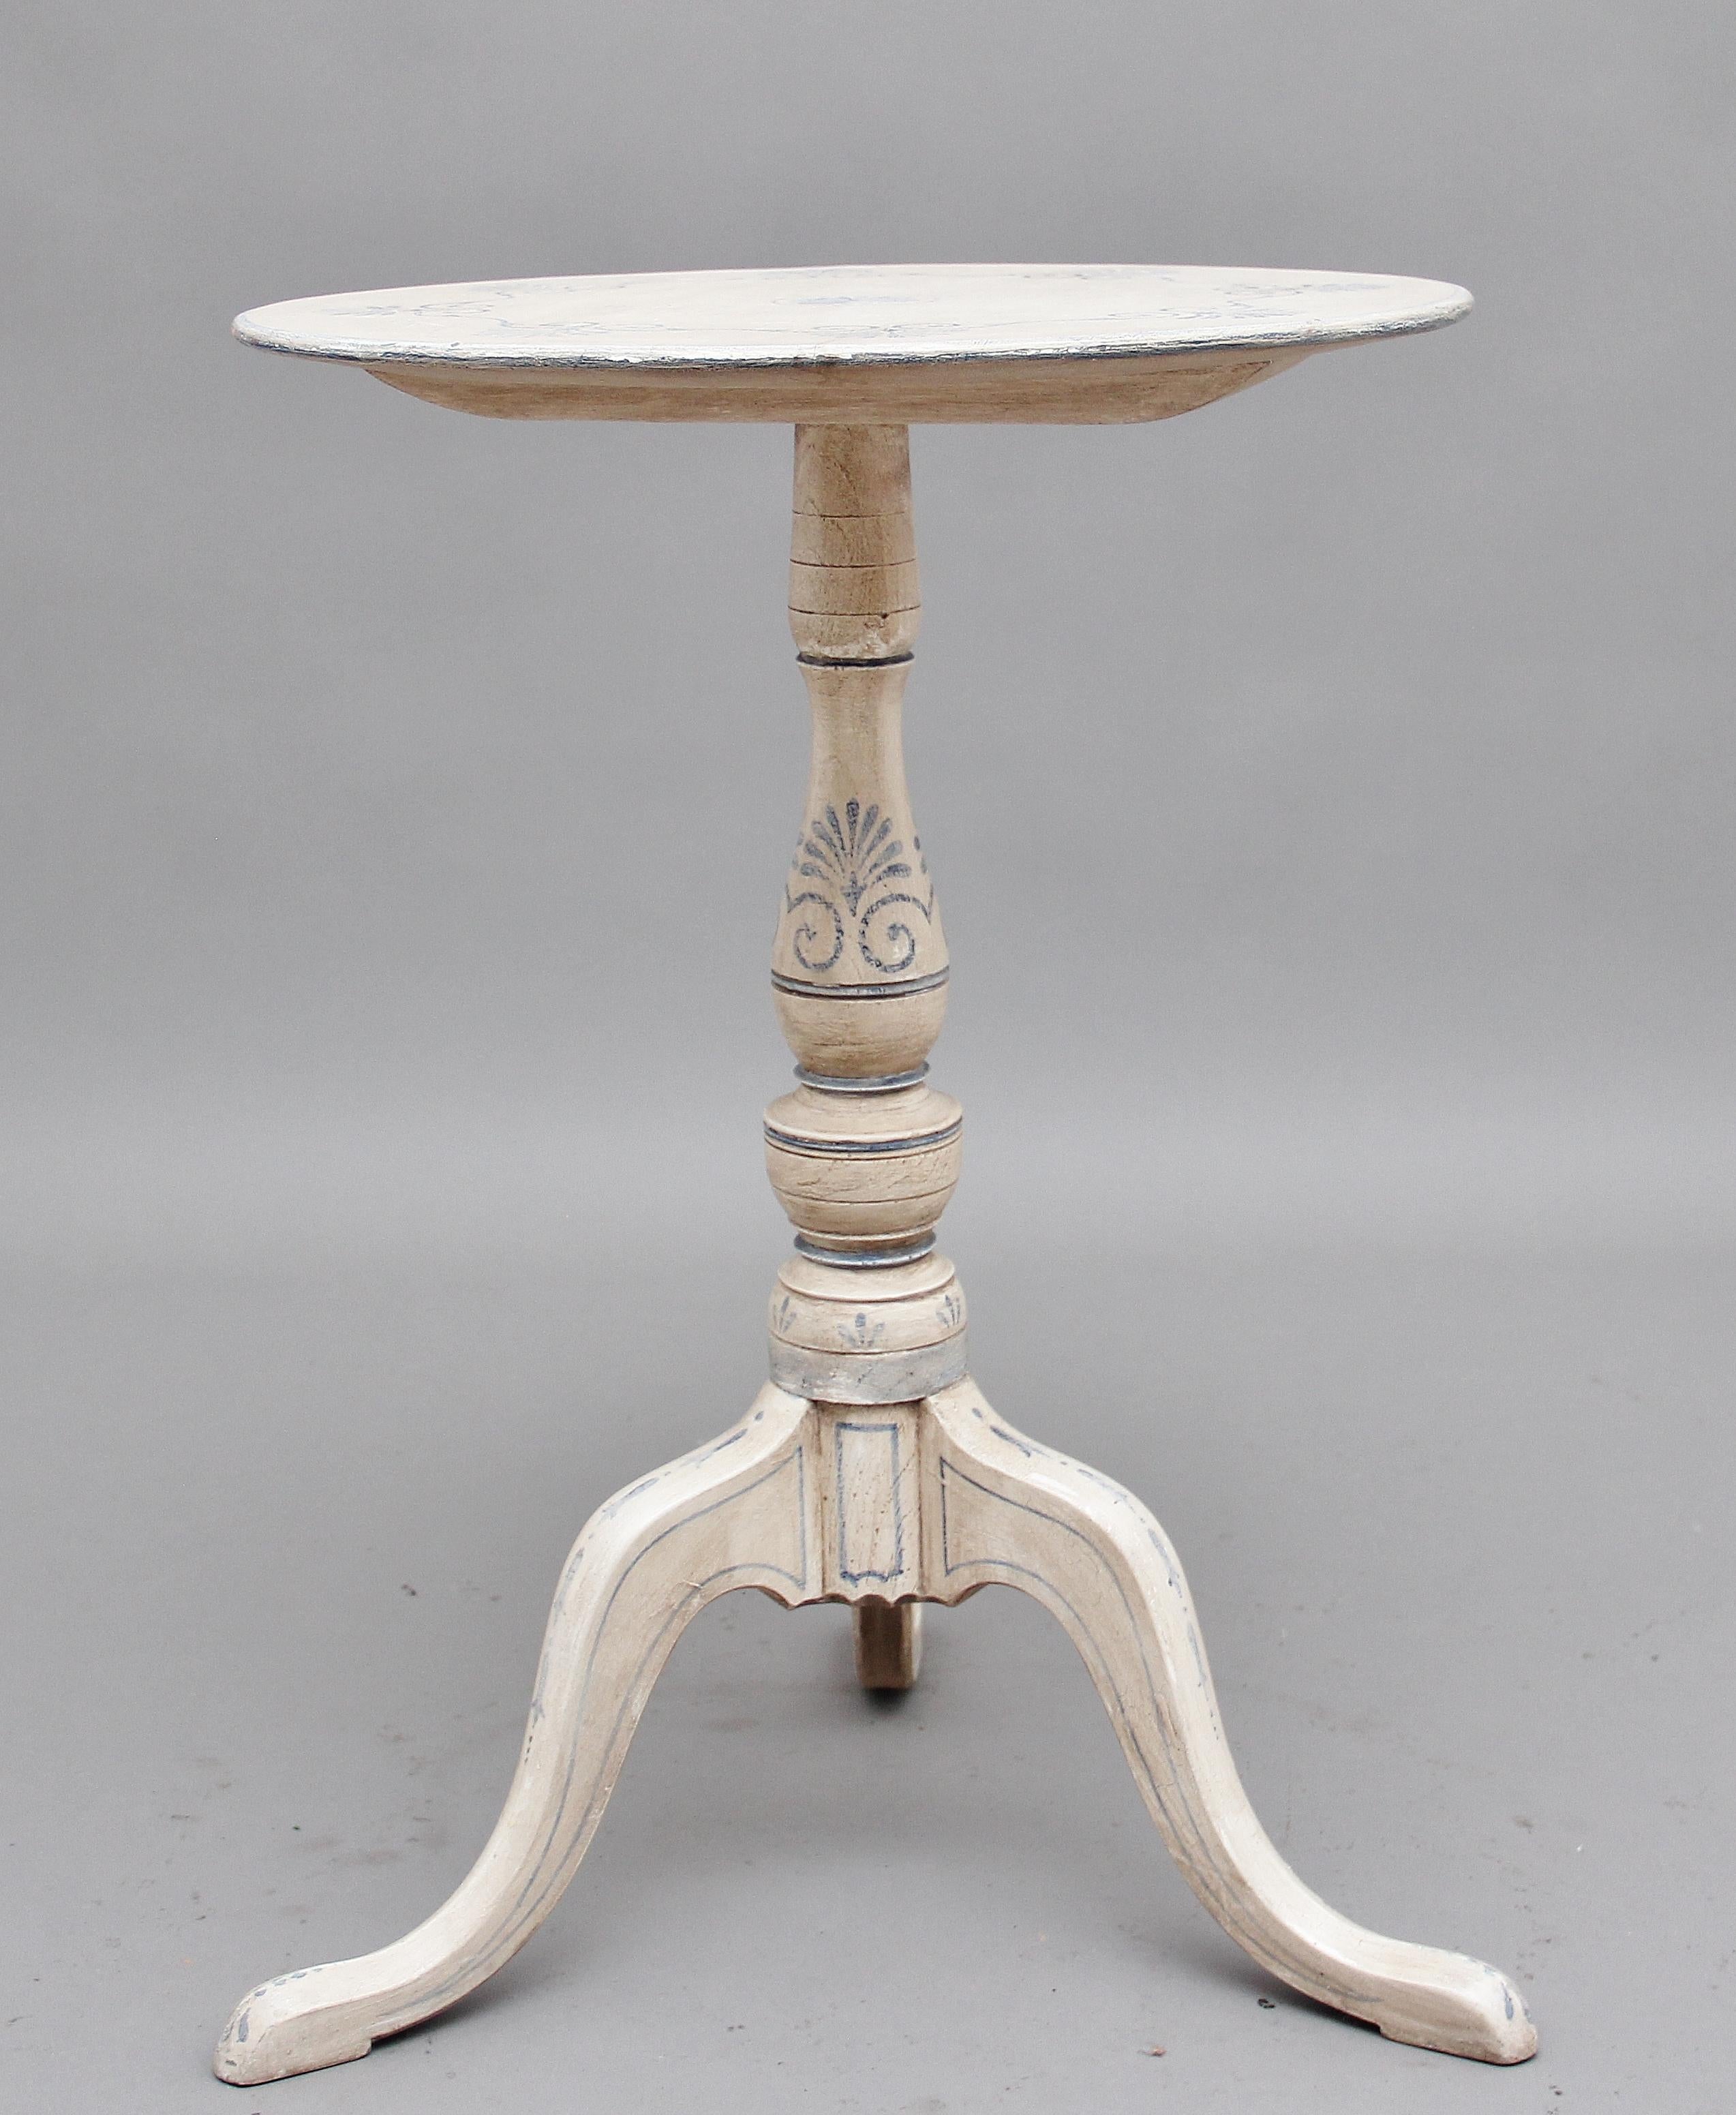 A decorative early 20th century painted tripod table, the circular top having a nice blue painted design, supported on an elegant turned column terminating with three slender shaped legs, circa 1780.